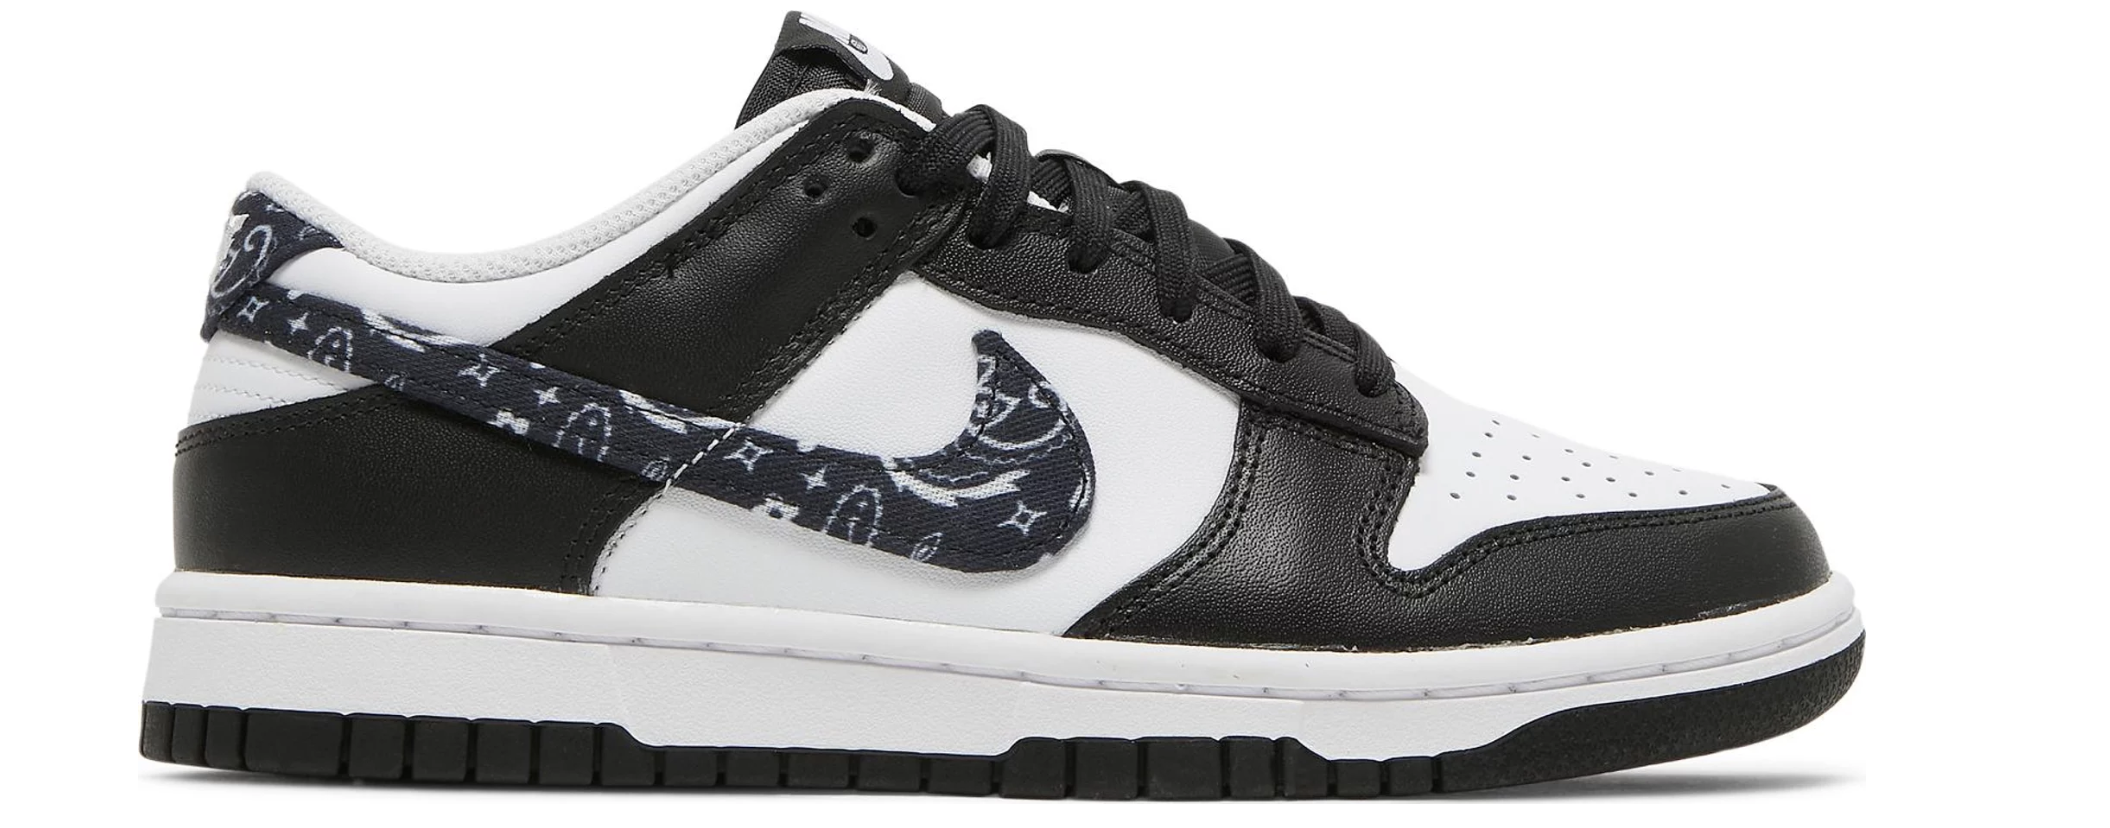 Nike Wmns Dunk Low Sneaker in Black Paisley   DH